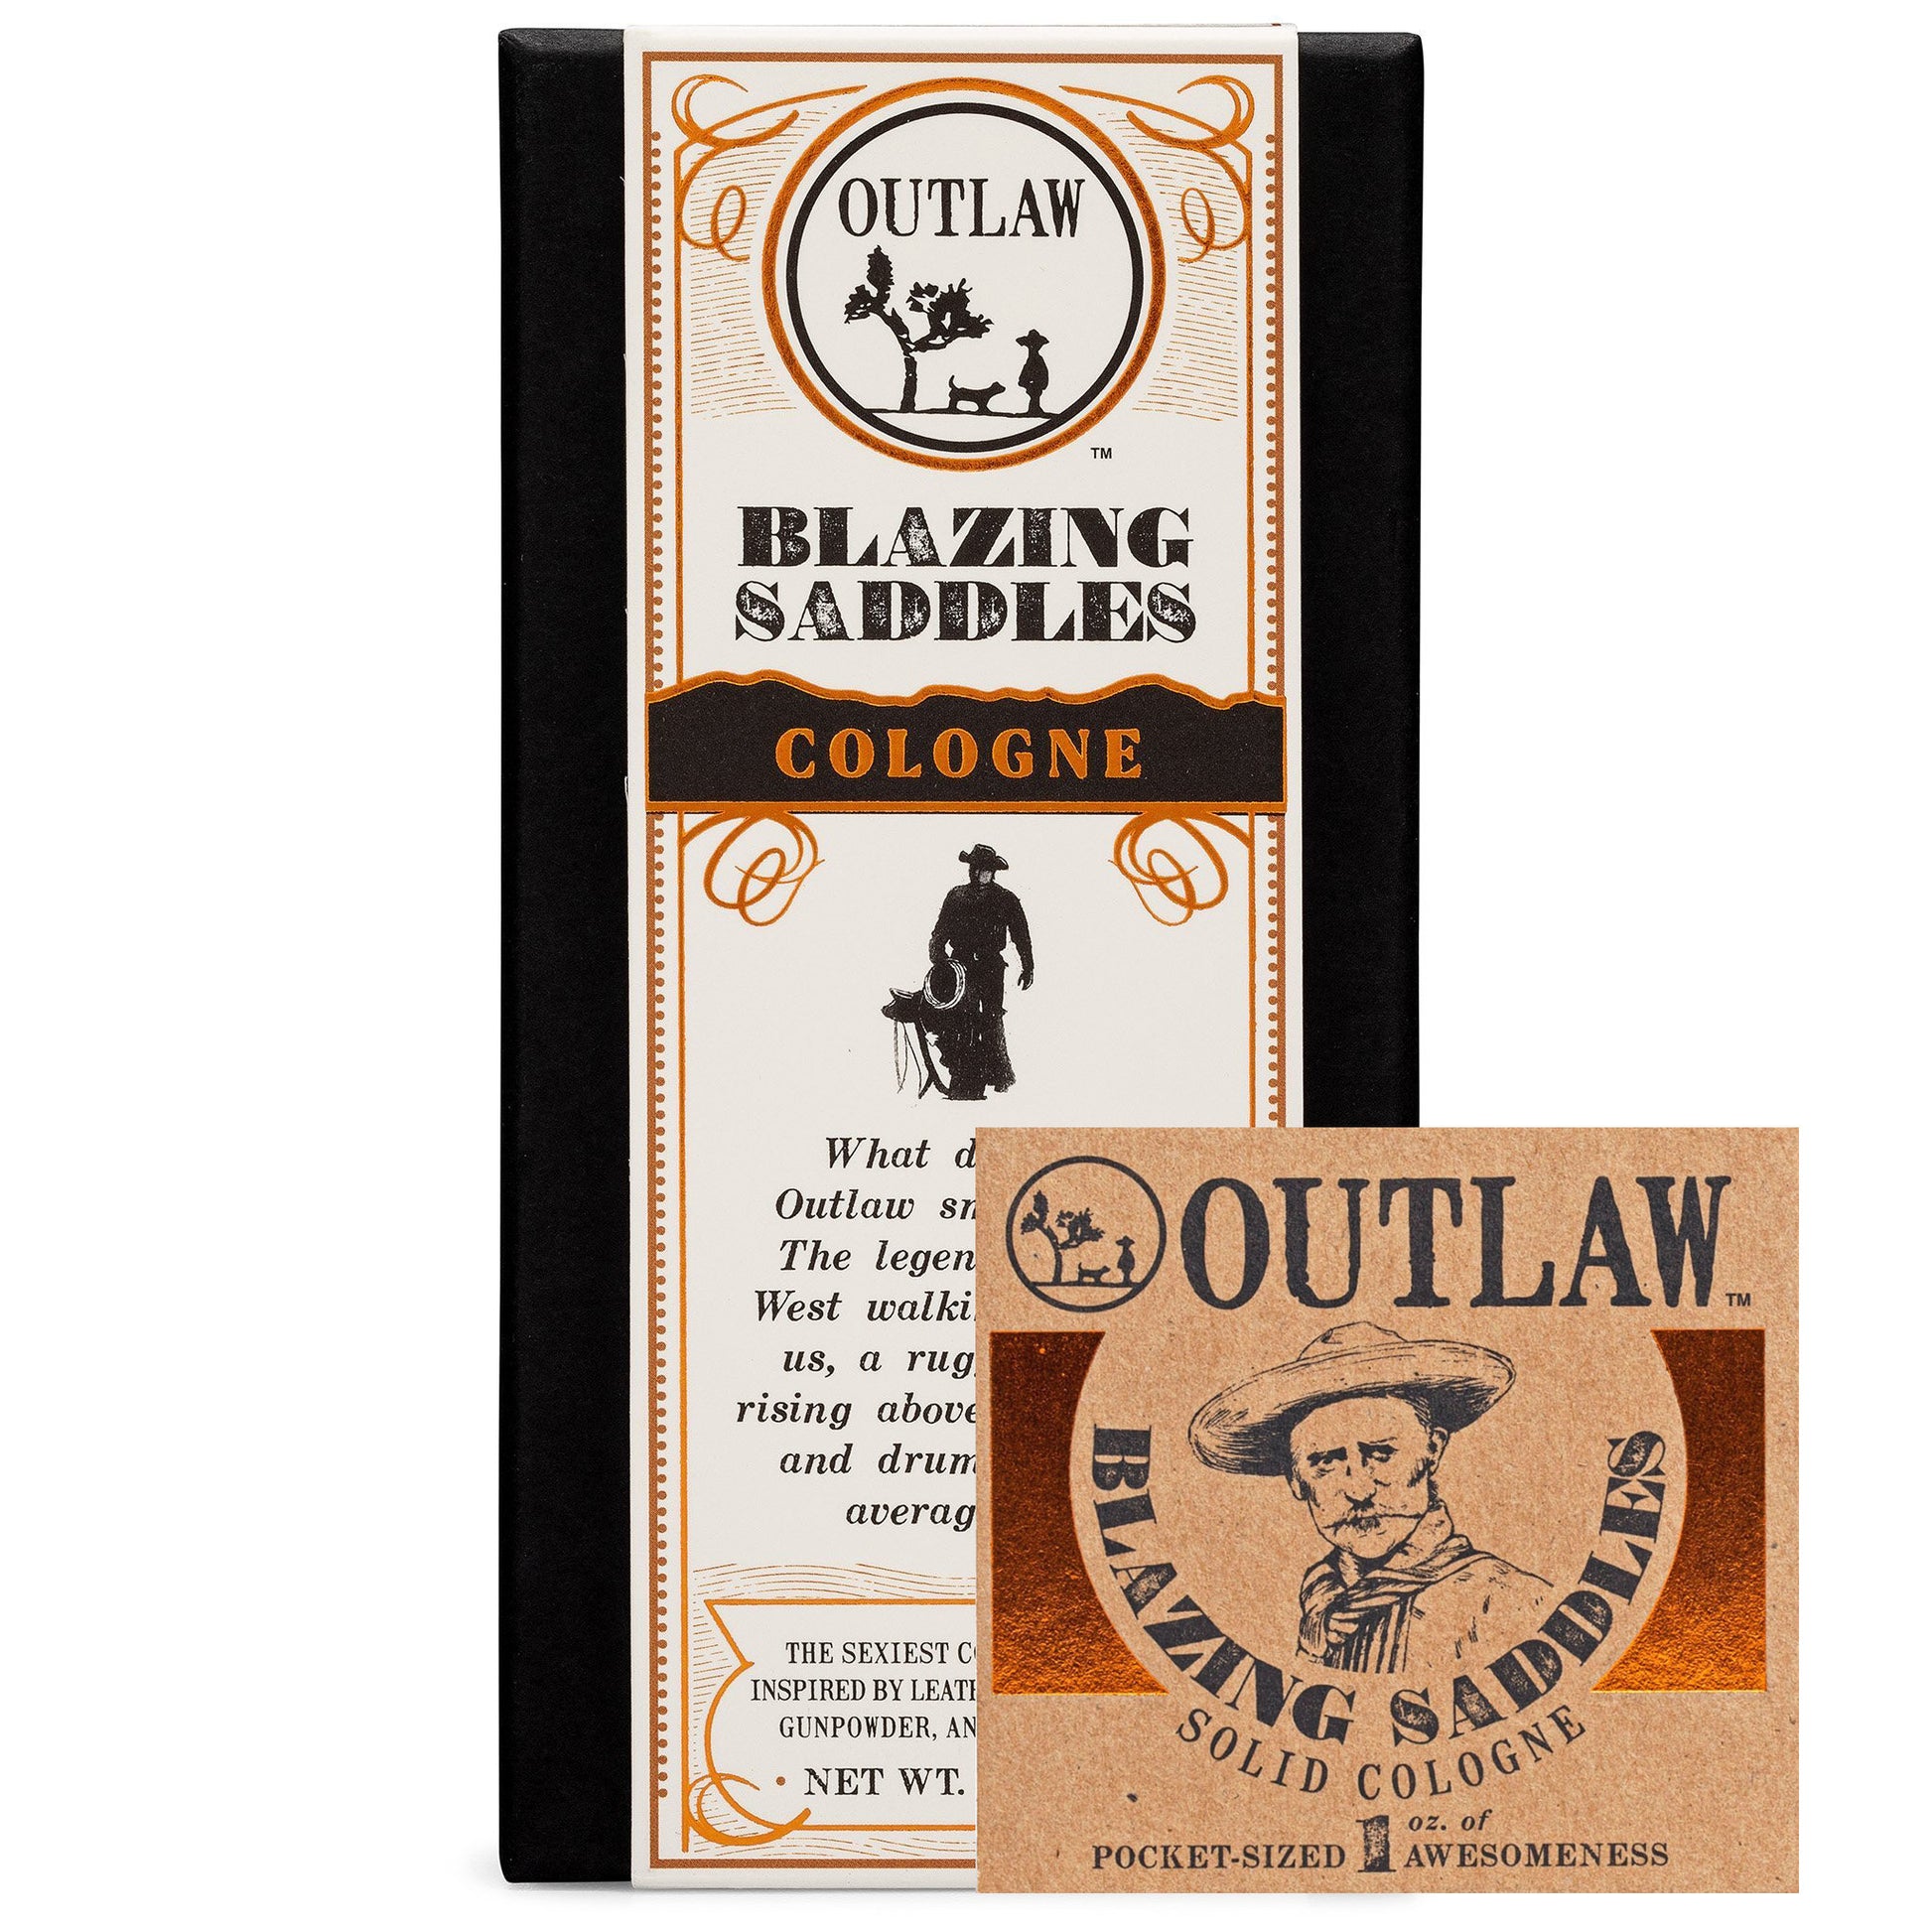 Spray and solid cologne with Blazing Saddles leather and whiskey scent by Outlaw